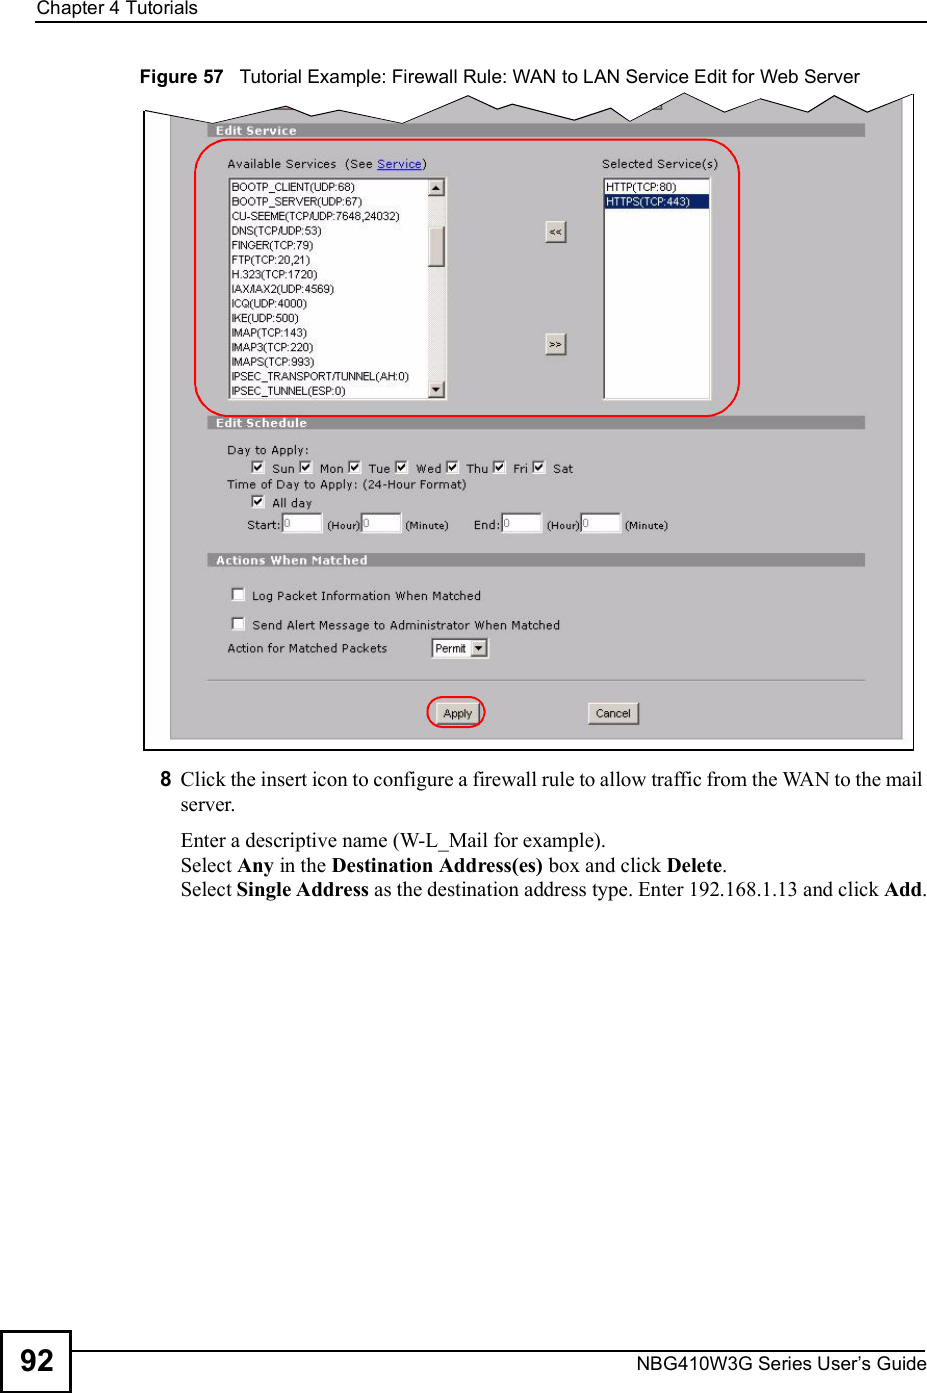 Chapter 4TutorialsNBG410W3G Series User s Guide92Figure 57   Tutorial Example: Firewall Rule: WAN to LAN Service Edit for Web Server 8Click the insert icon to configure a firewall rule to allow traffic from the WAN to the mail server.Enter a descriptive name (W-L_Mail for example). Select Any in the Destination Address(es) box and click Delete.Select Single Address as the destination address type. Enter 192.168.1.13 and click Add.